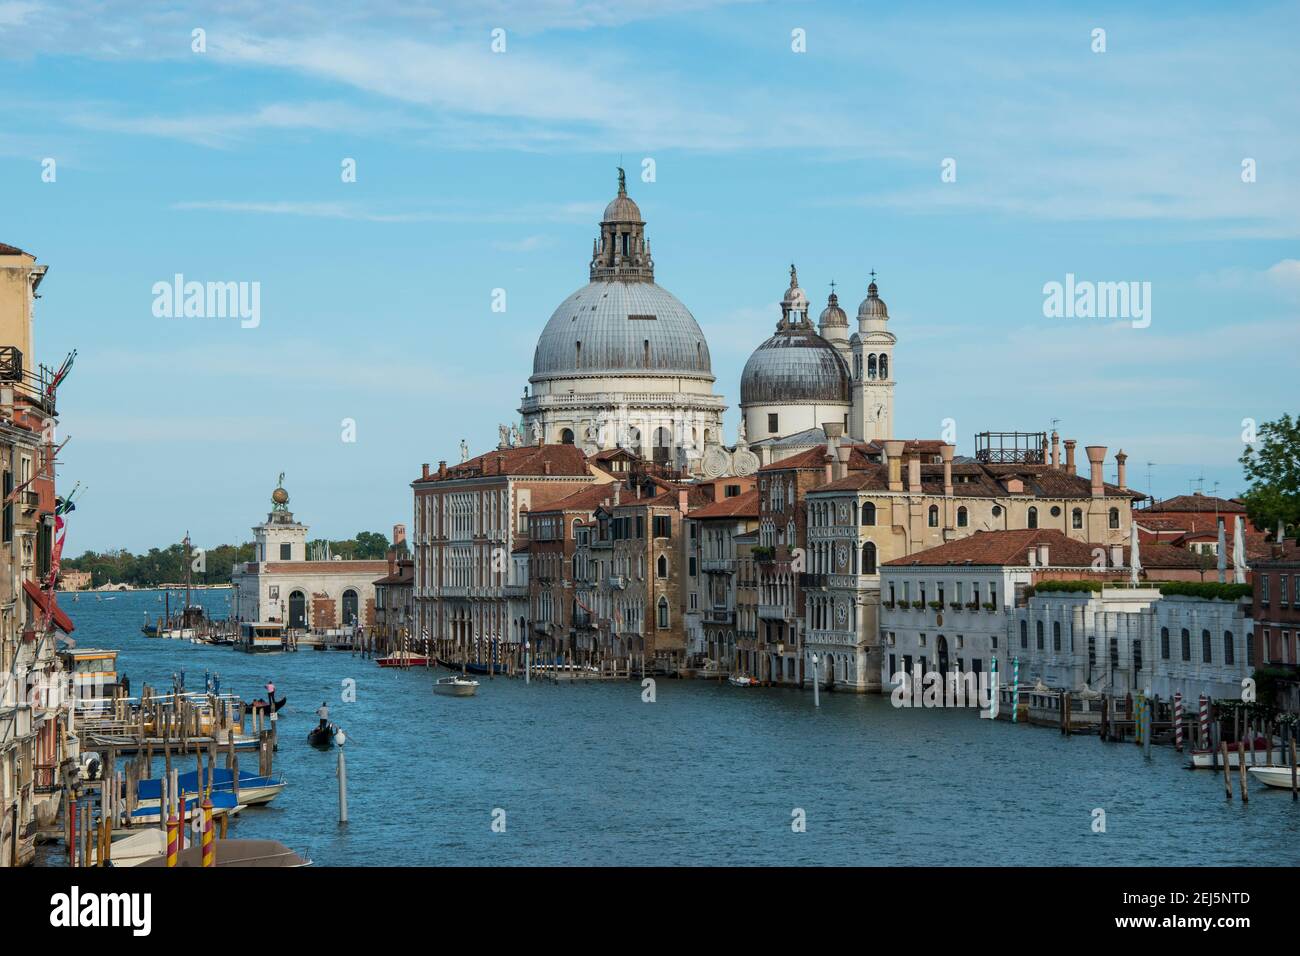 Buildings on the Grand Canal, city of Venice, Italy, Europe Stock Photo